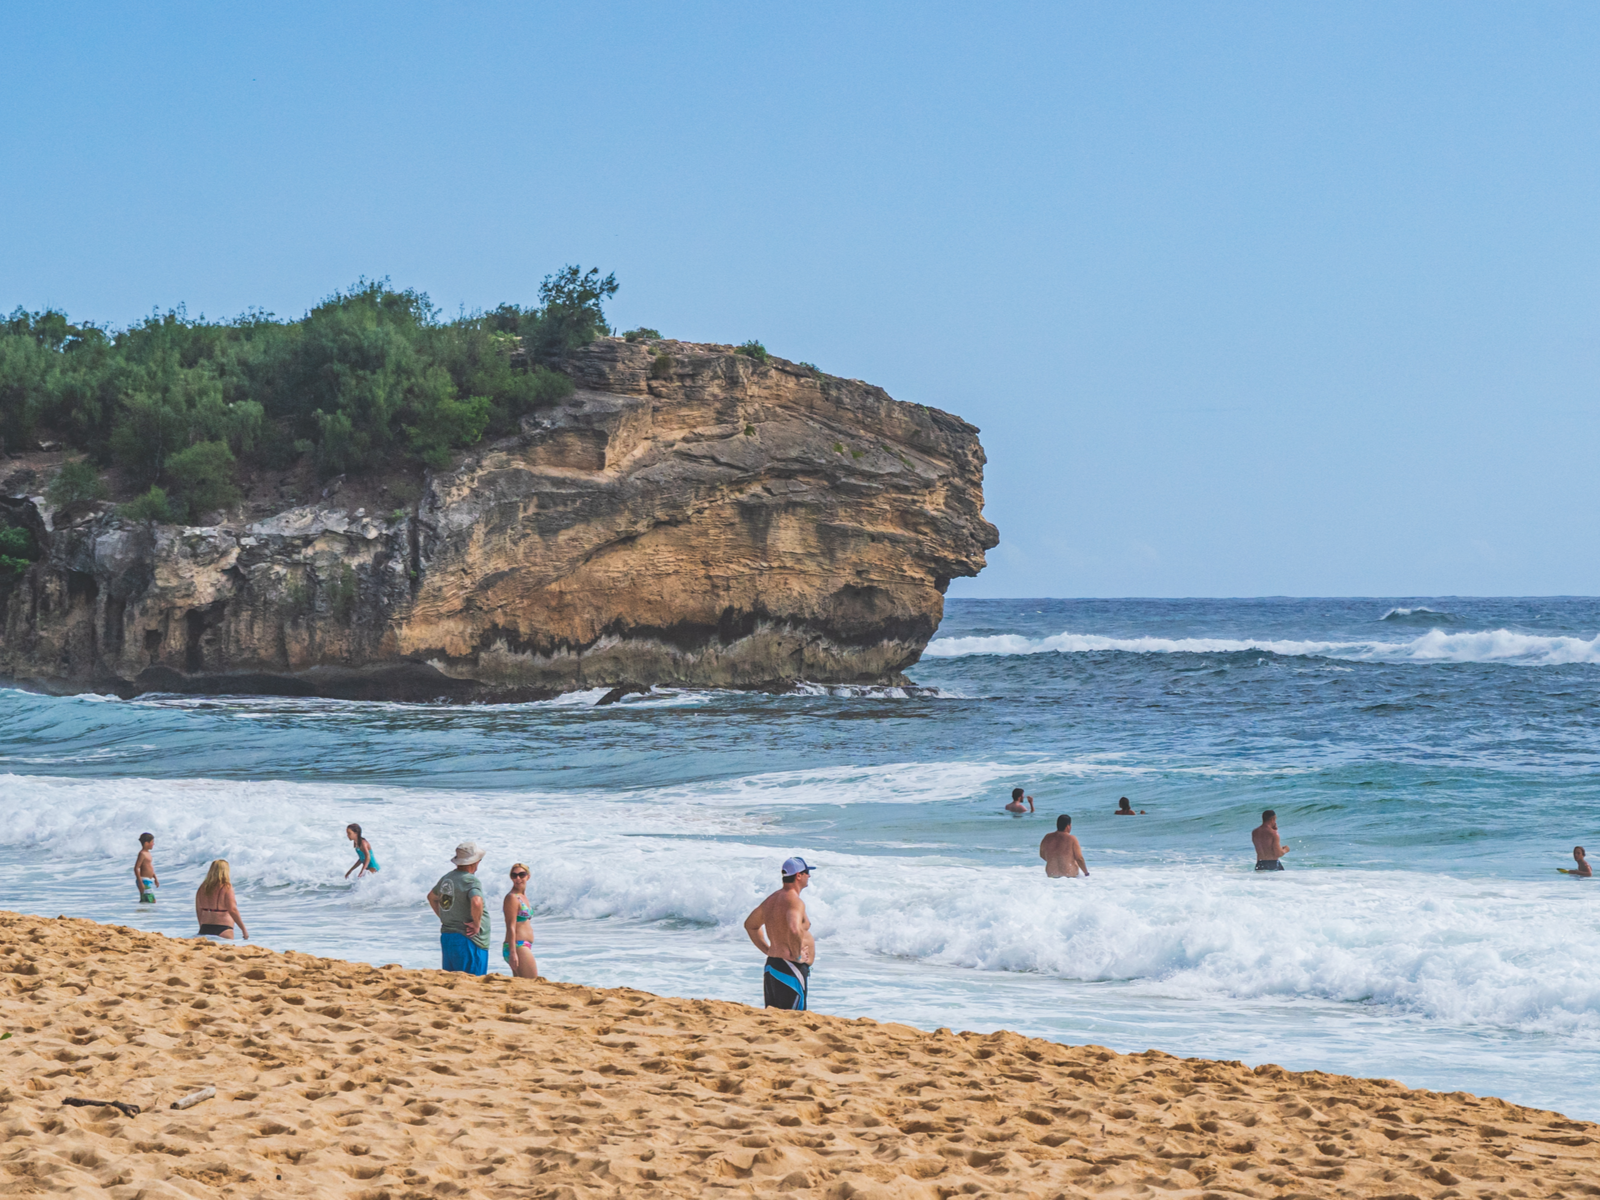 Tourists enjoy the wavy coast and the tall cliff of Shipwreck Beach, where cliff jumping here is one of the best things to do in Kauai